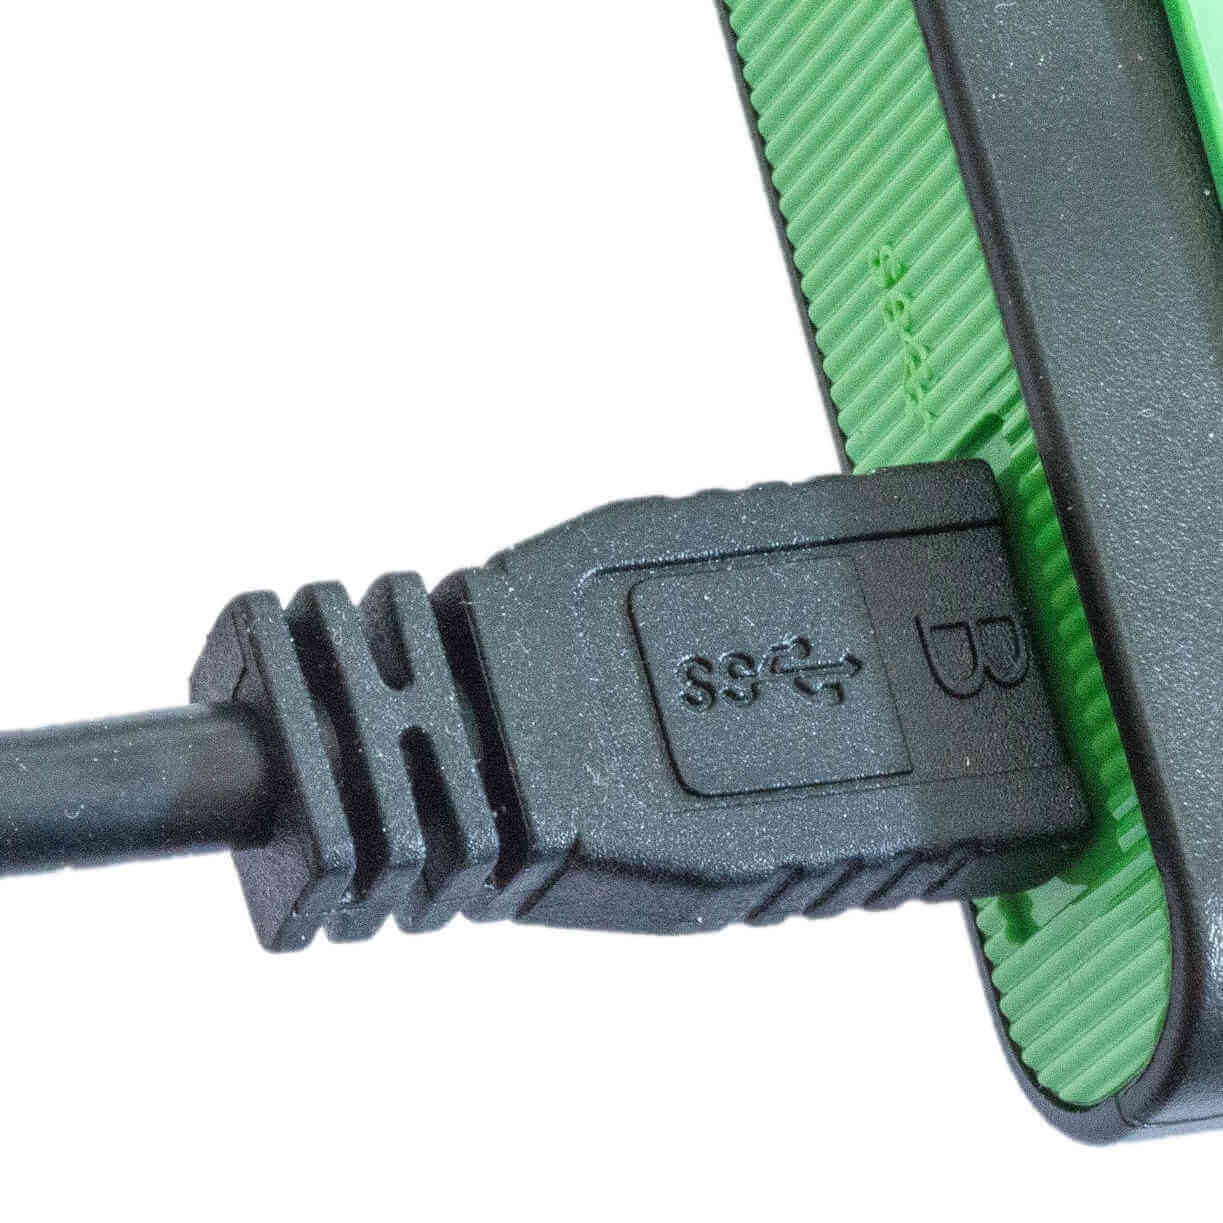 USB safely remove hardware